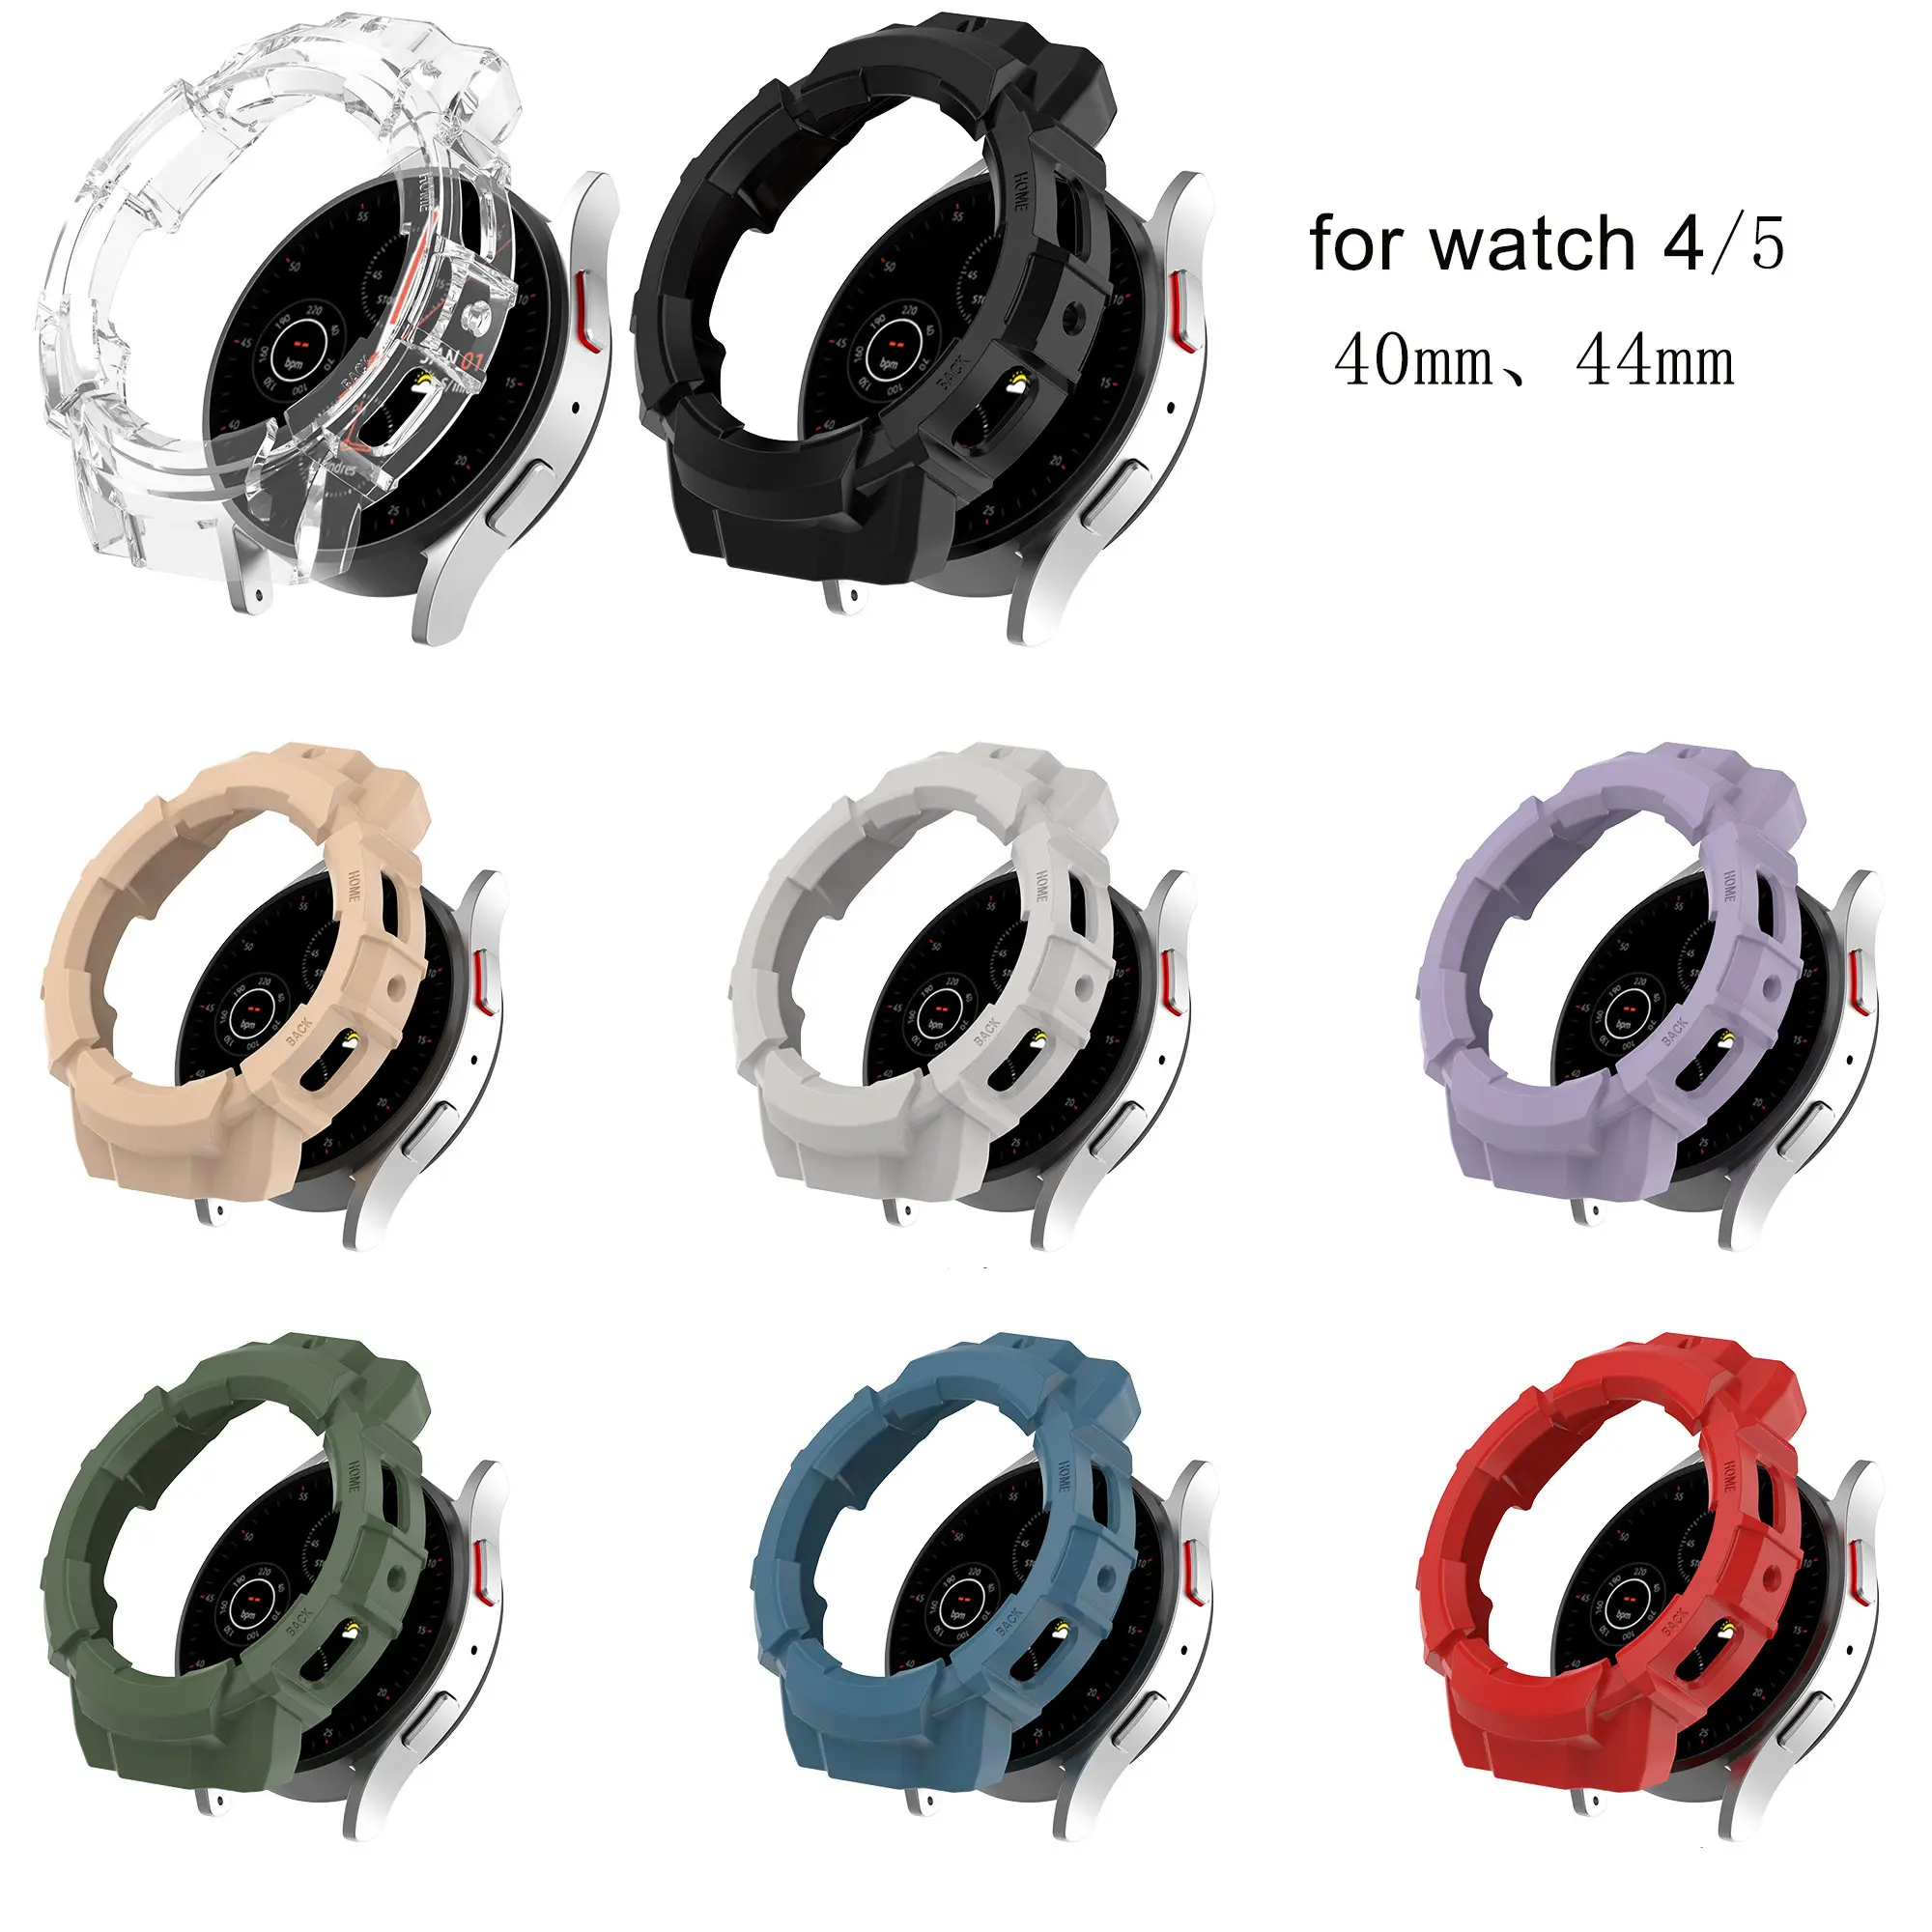 Factory outlet 40mm 44mm PC case Graduated Protective shell For Samsung Galaxy watch 4 5 parts